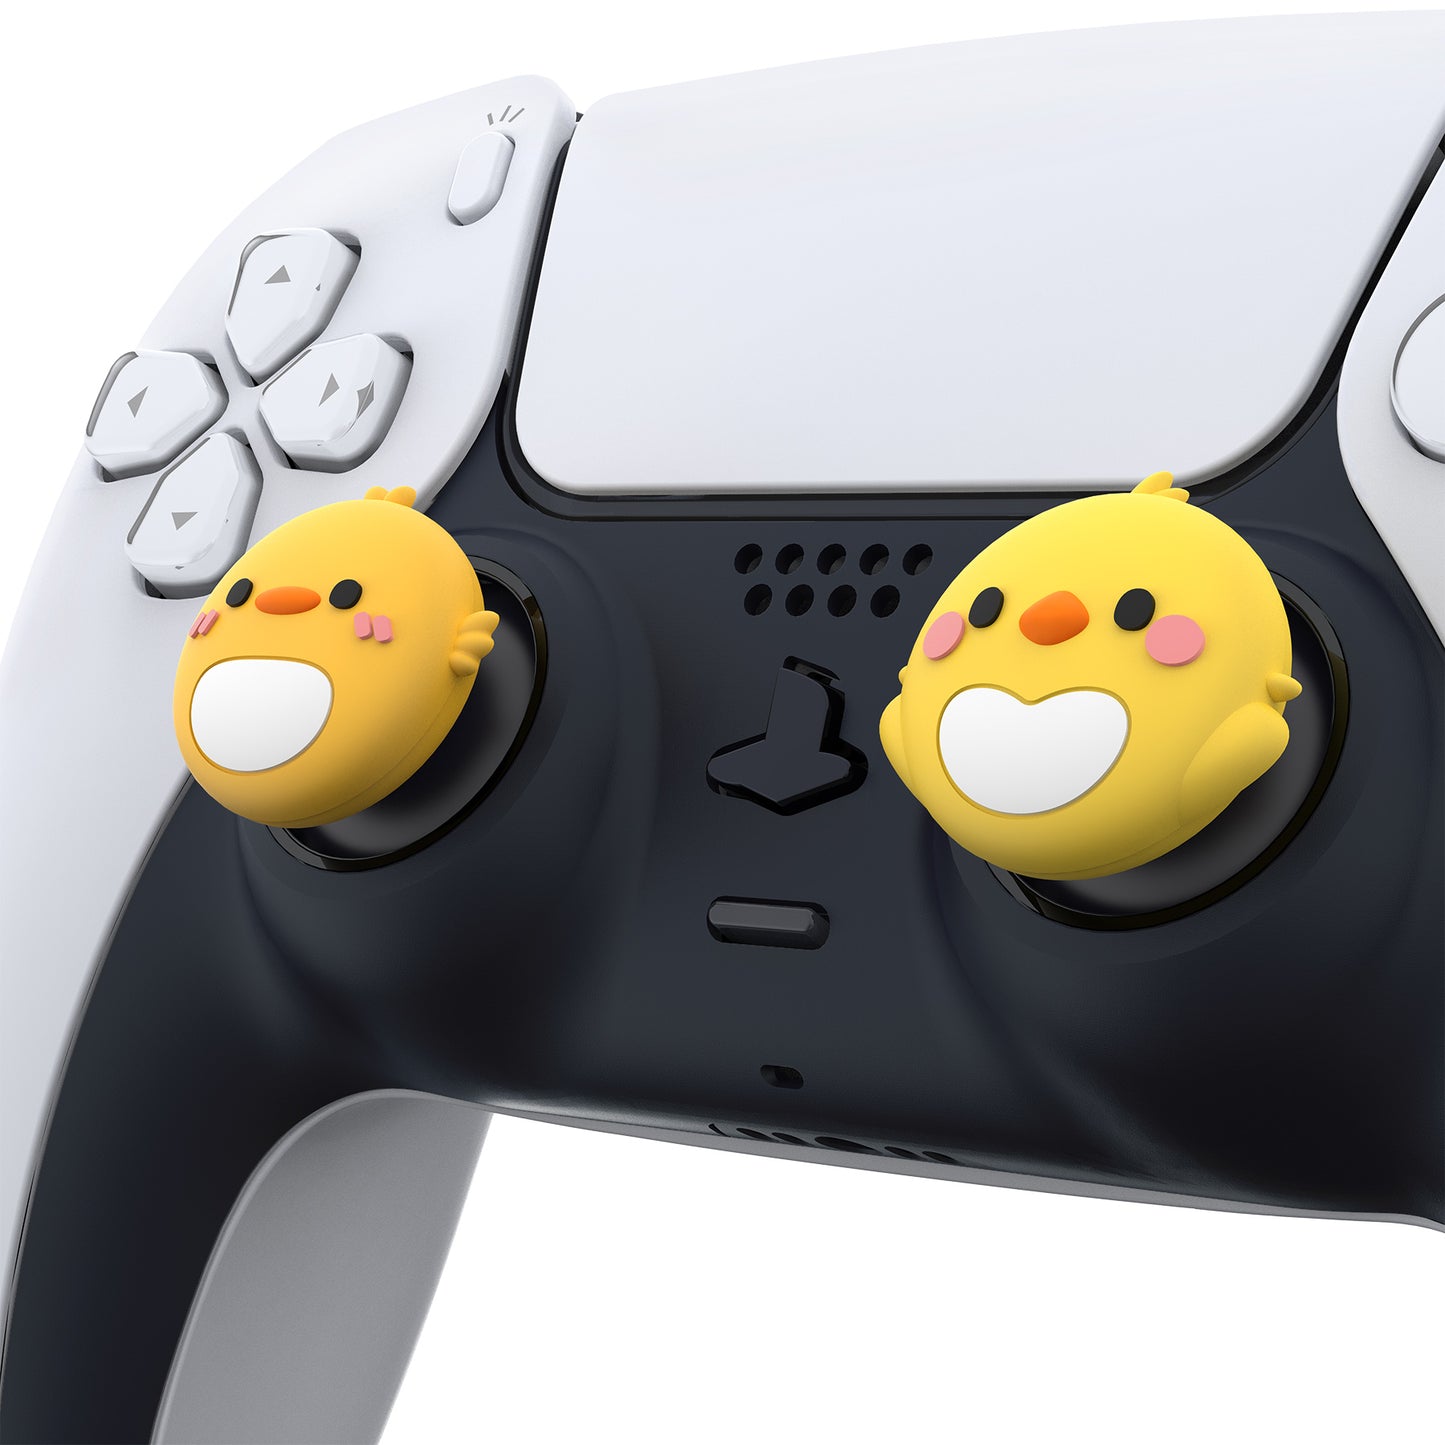 PlayVital Cute Thumb Grip Caps for ps5/4 Controller, Silicone Analog Stick Caps Cover for Xbox Series X/S, Thumbstick Caps for Switch Pro Controller - Parrot & Chick - PJM3015 PlayVital